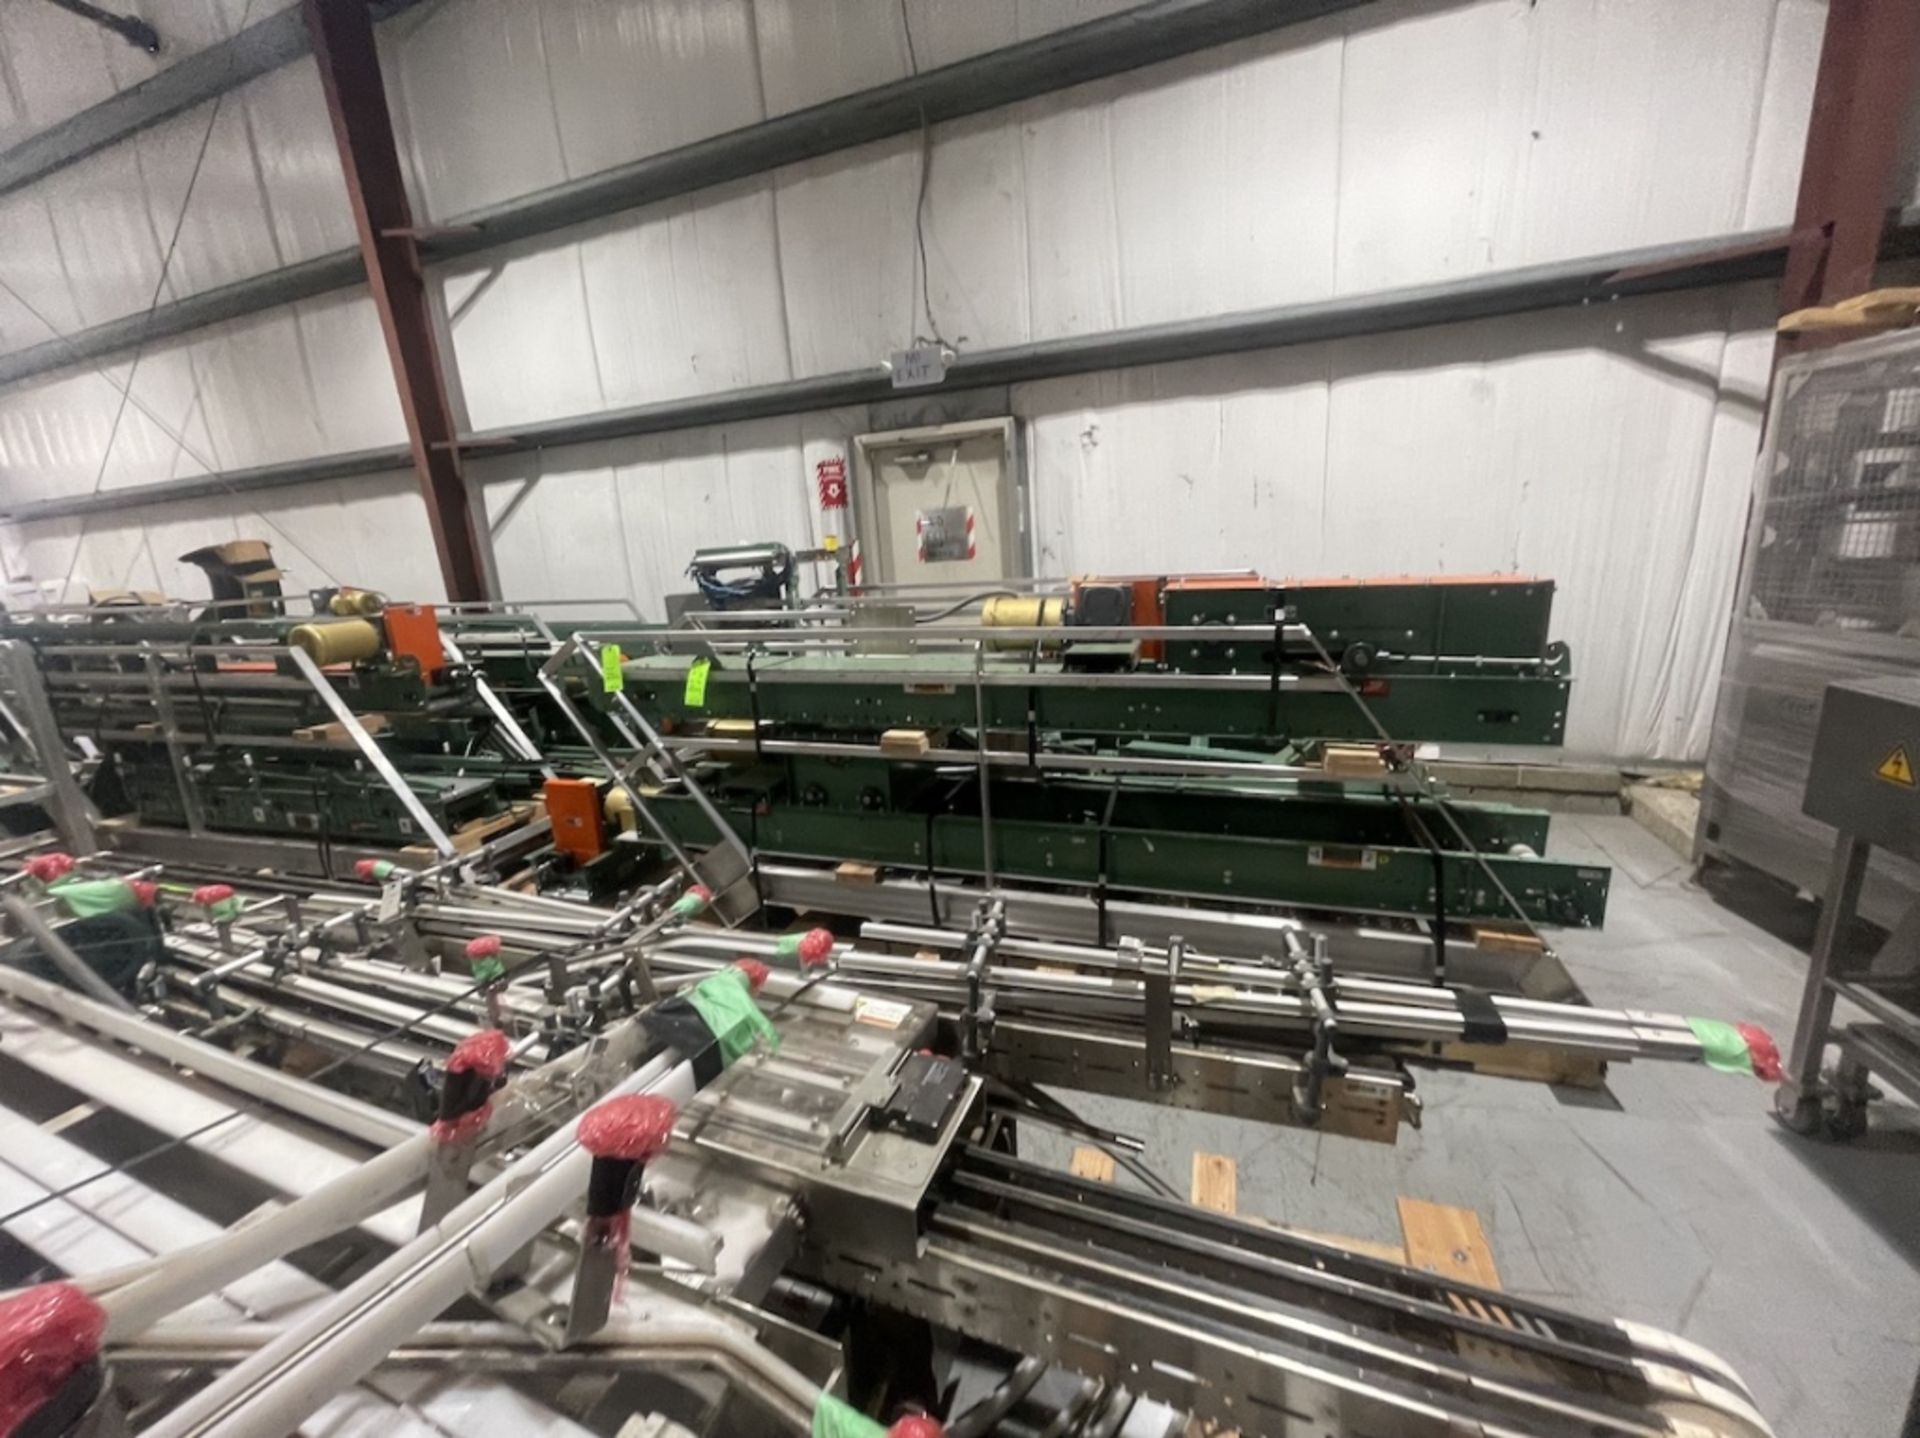 CASE CONVEYOR SYSTEMS ON PRODUCTION LINE (2019 MFG)(INV#83150)(Loading, Handling & Site Management - Image 7 of 11